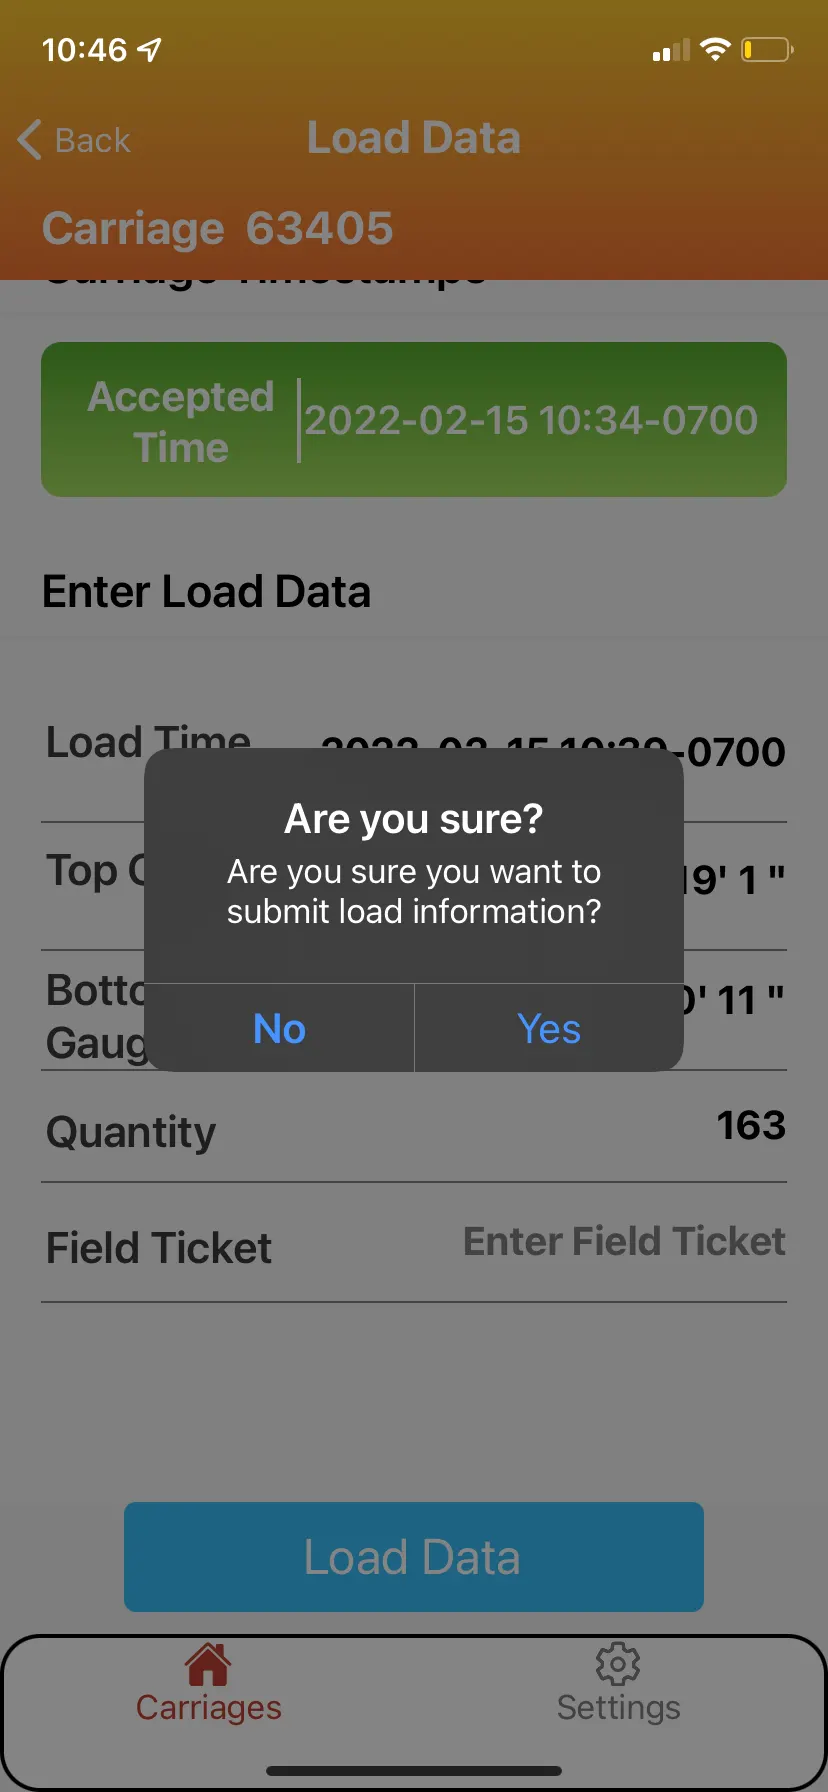 Confirm submitting the load data by selecting Yes.